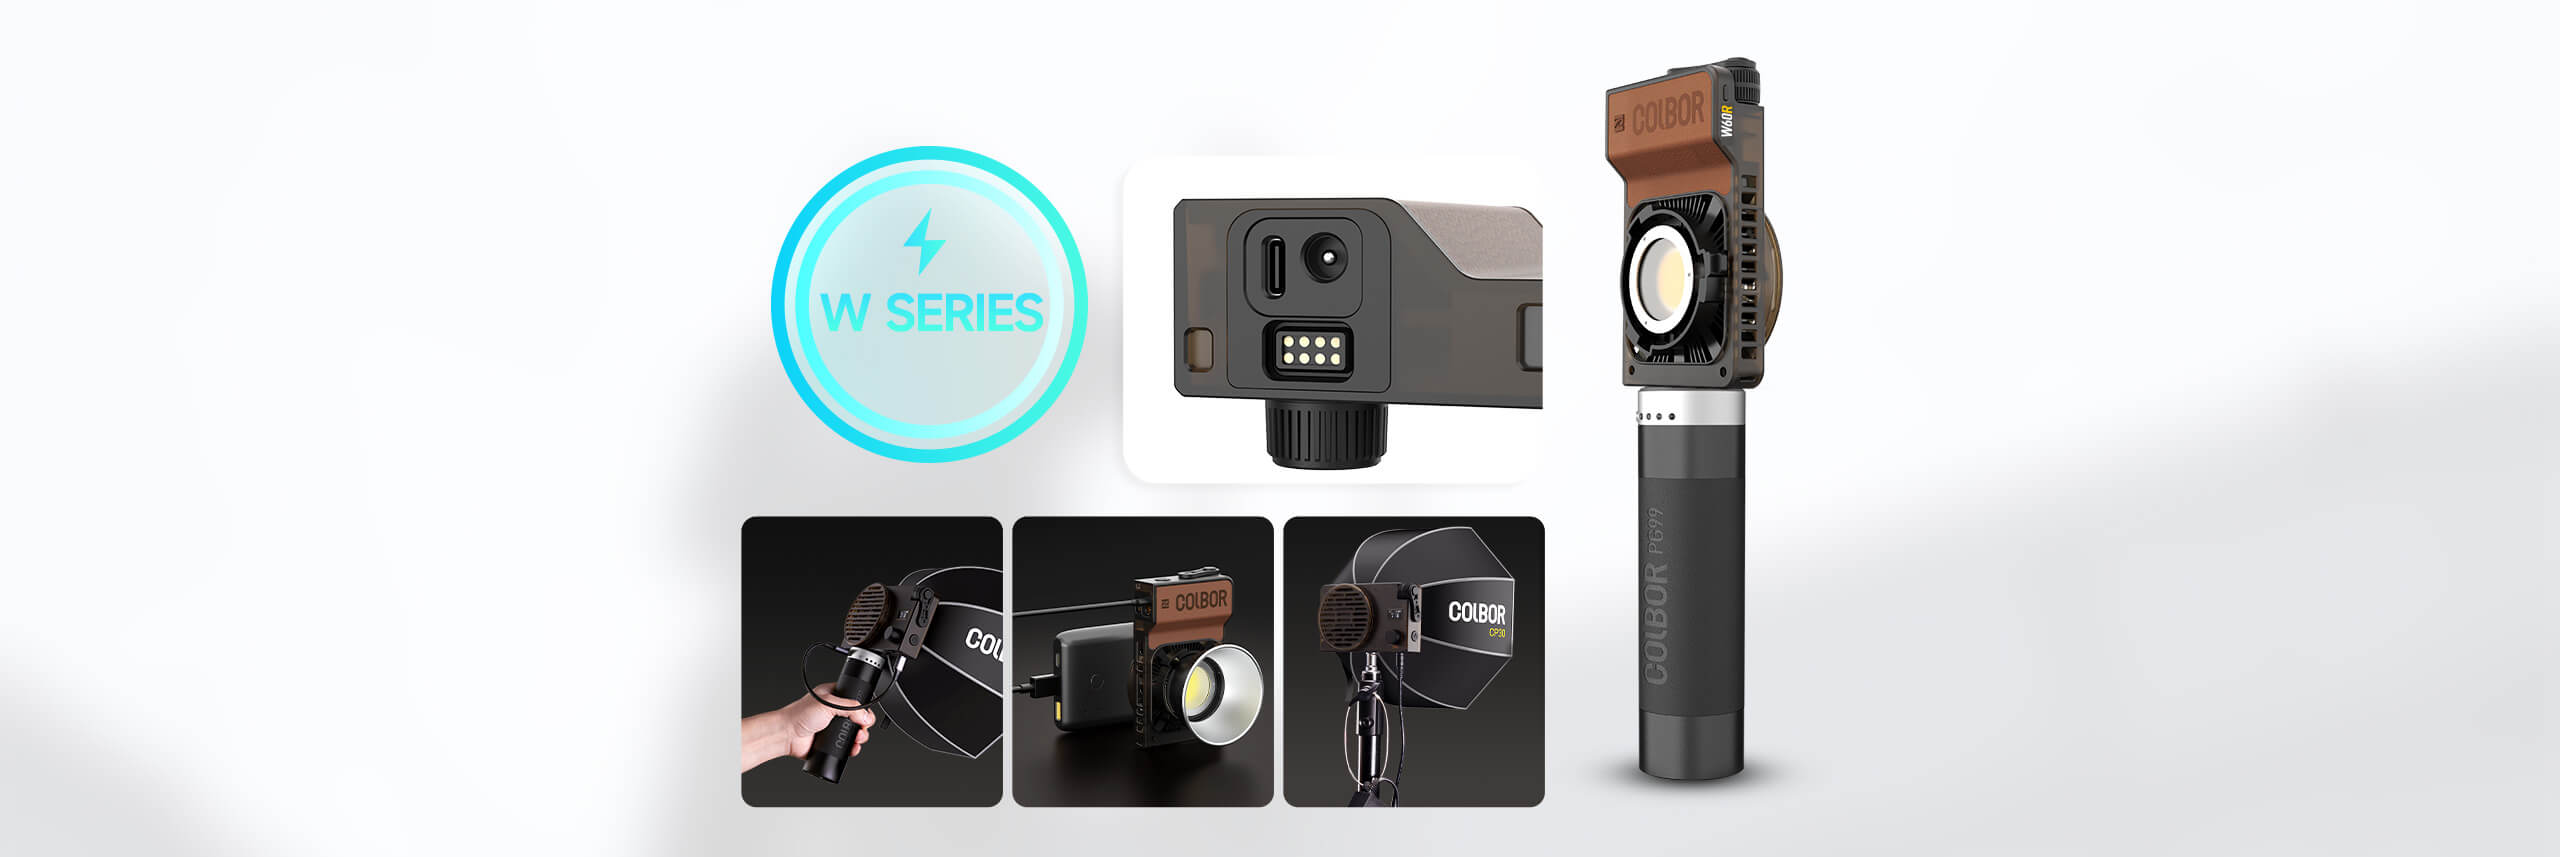 COLBOR W60 and W60R small LED lights for video can be powered by DC power, COLBOR battery grip, and power bank.